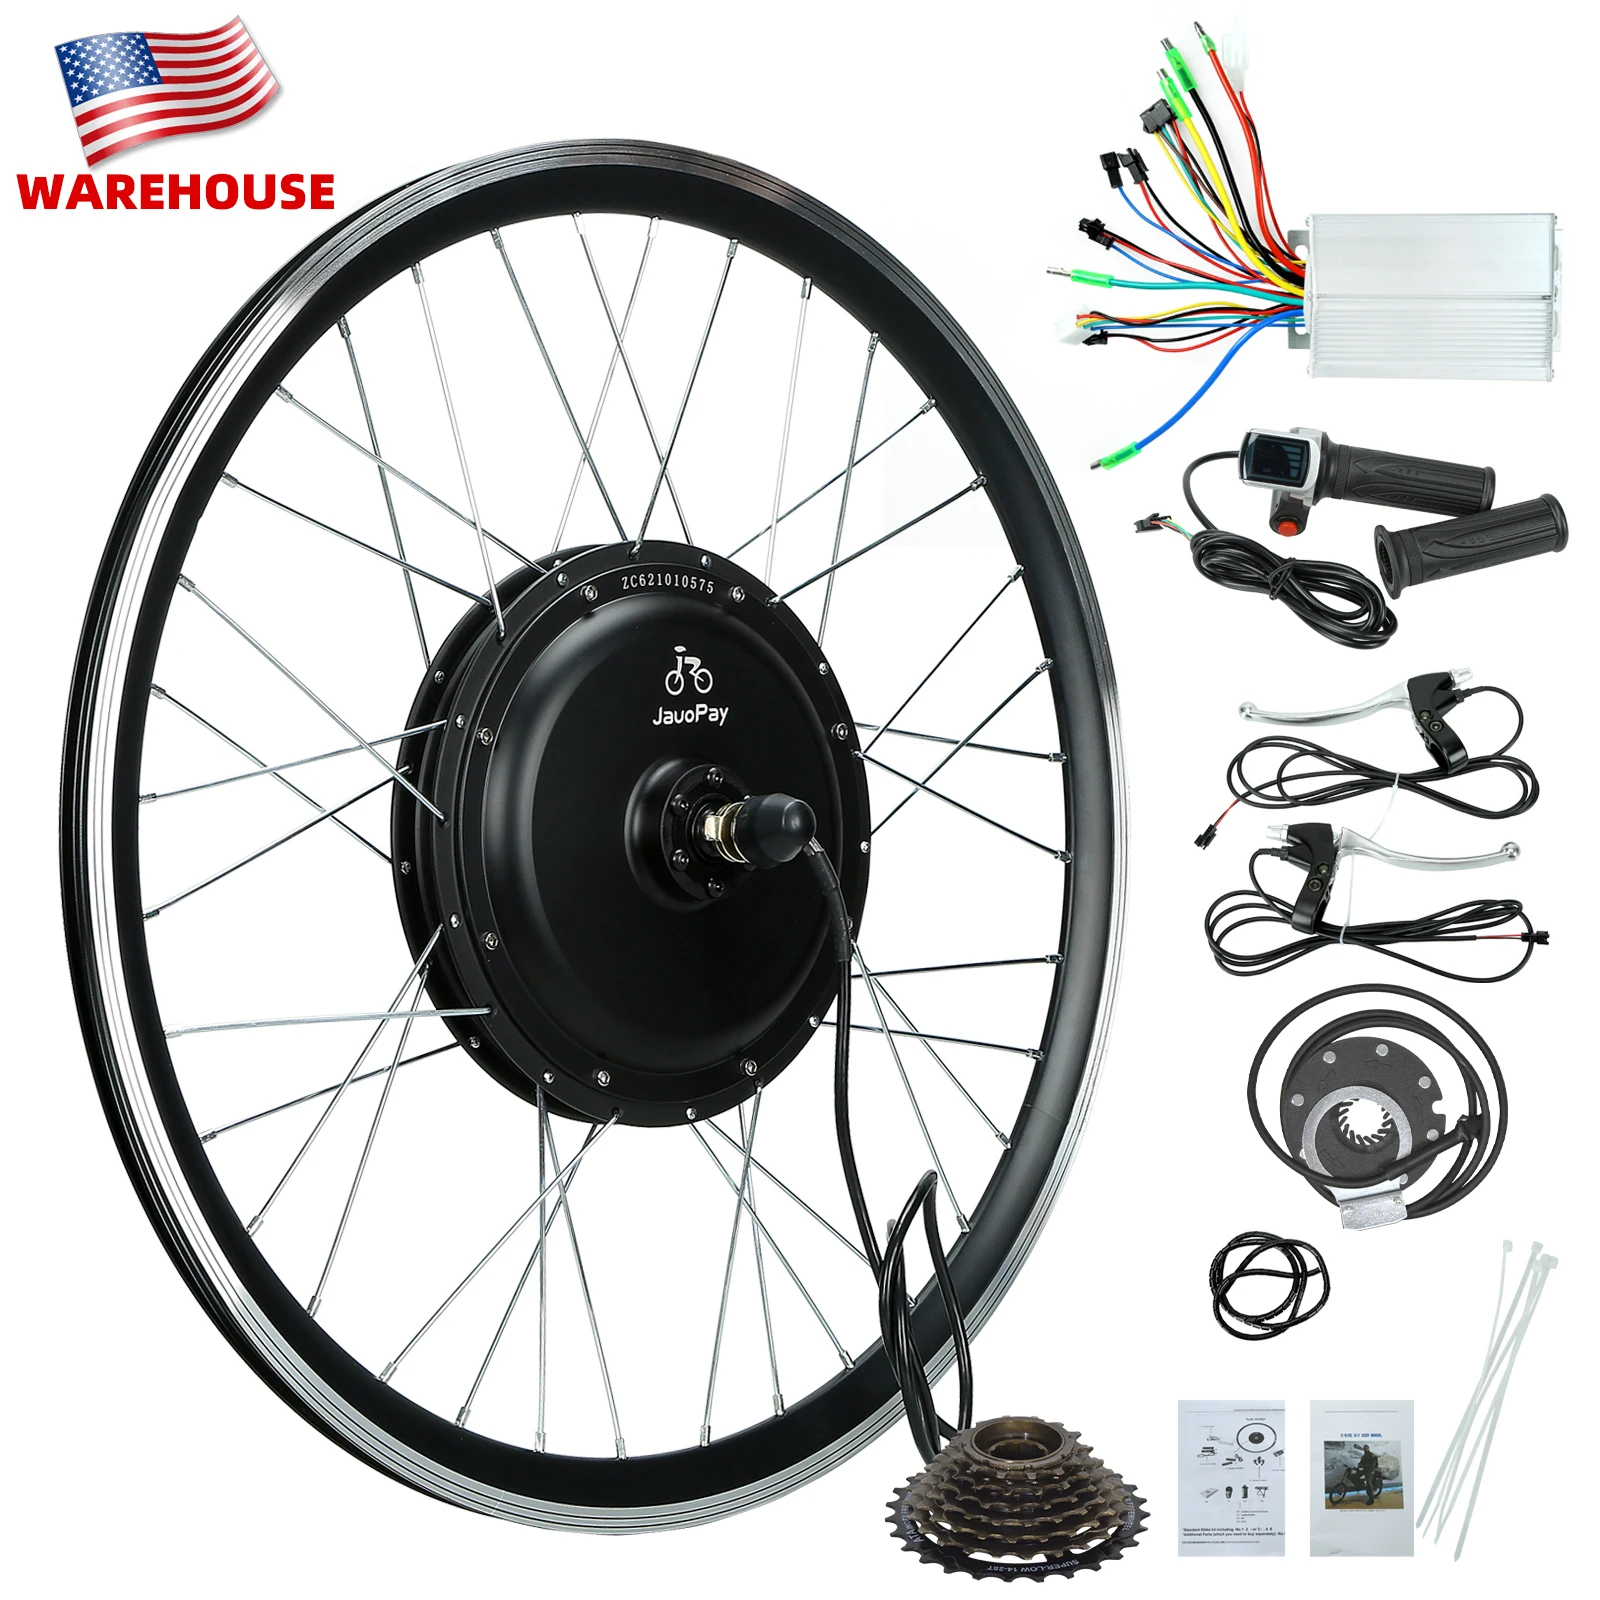 

USA Free shipping 750w 1000w 48v bldc motor kit electric bicycle conversion kit south africa